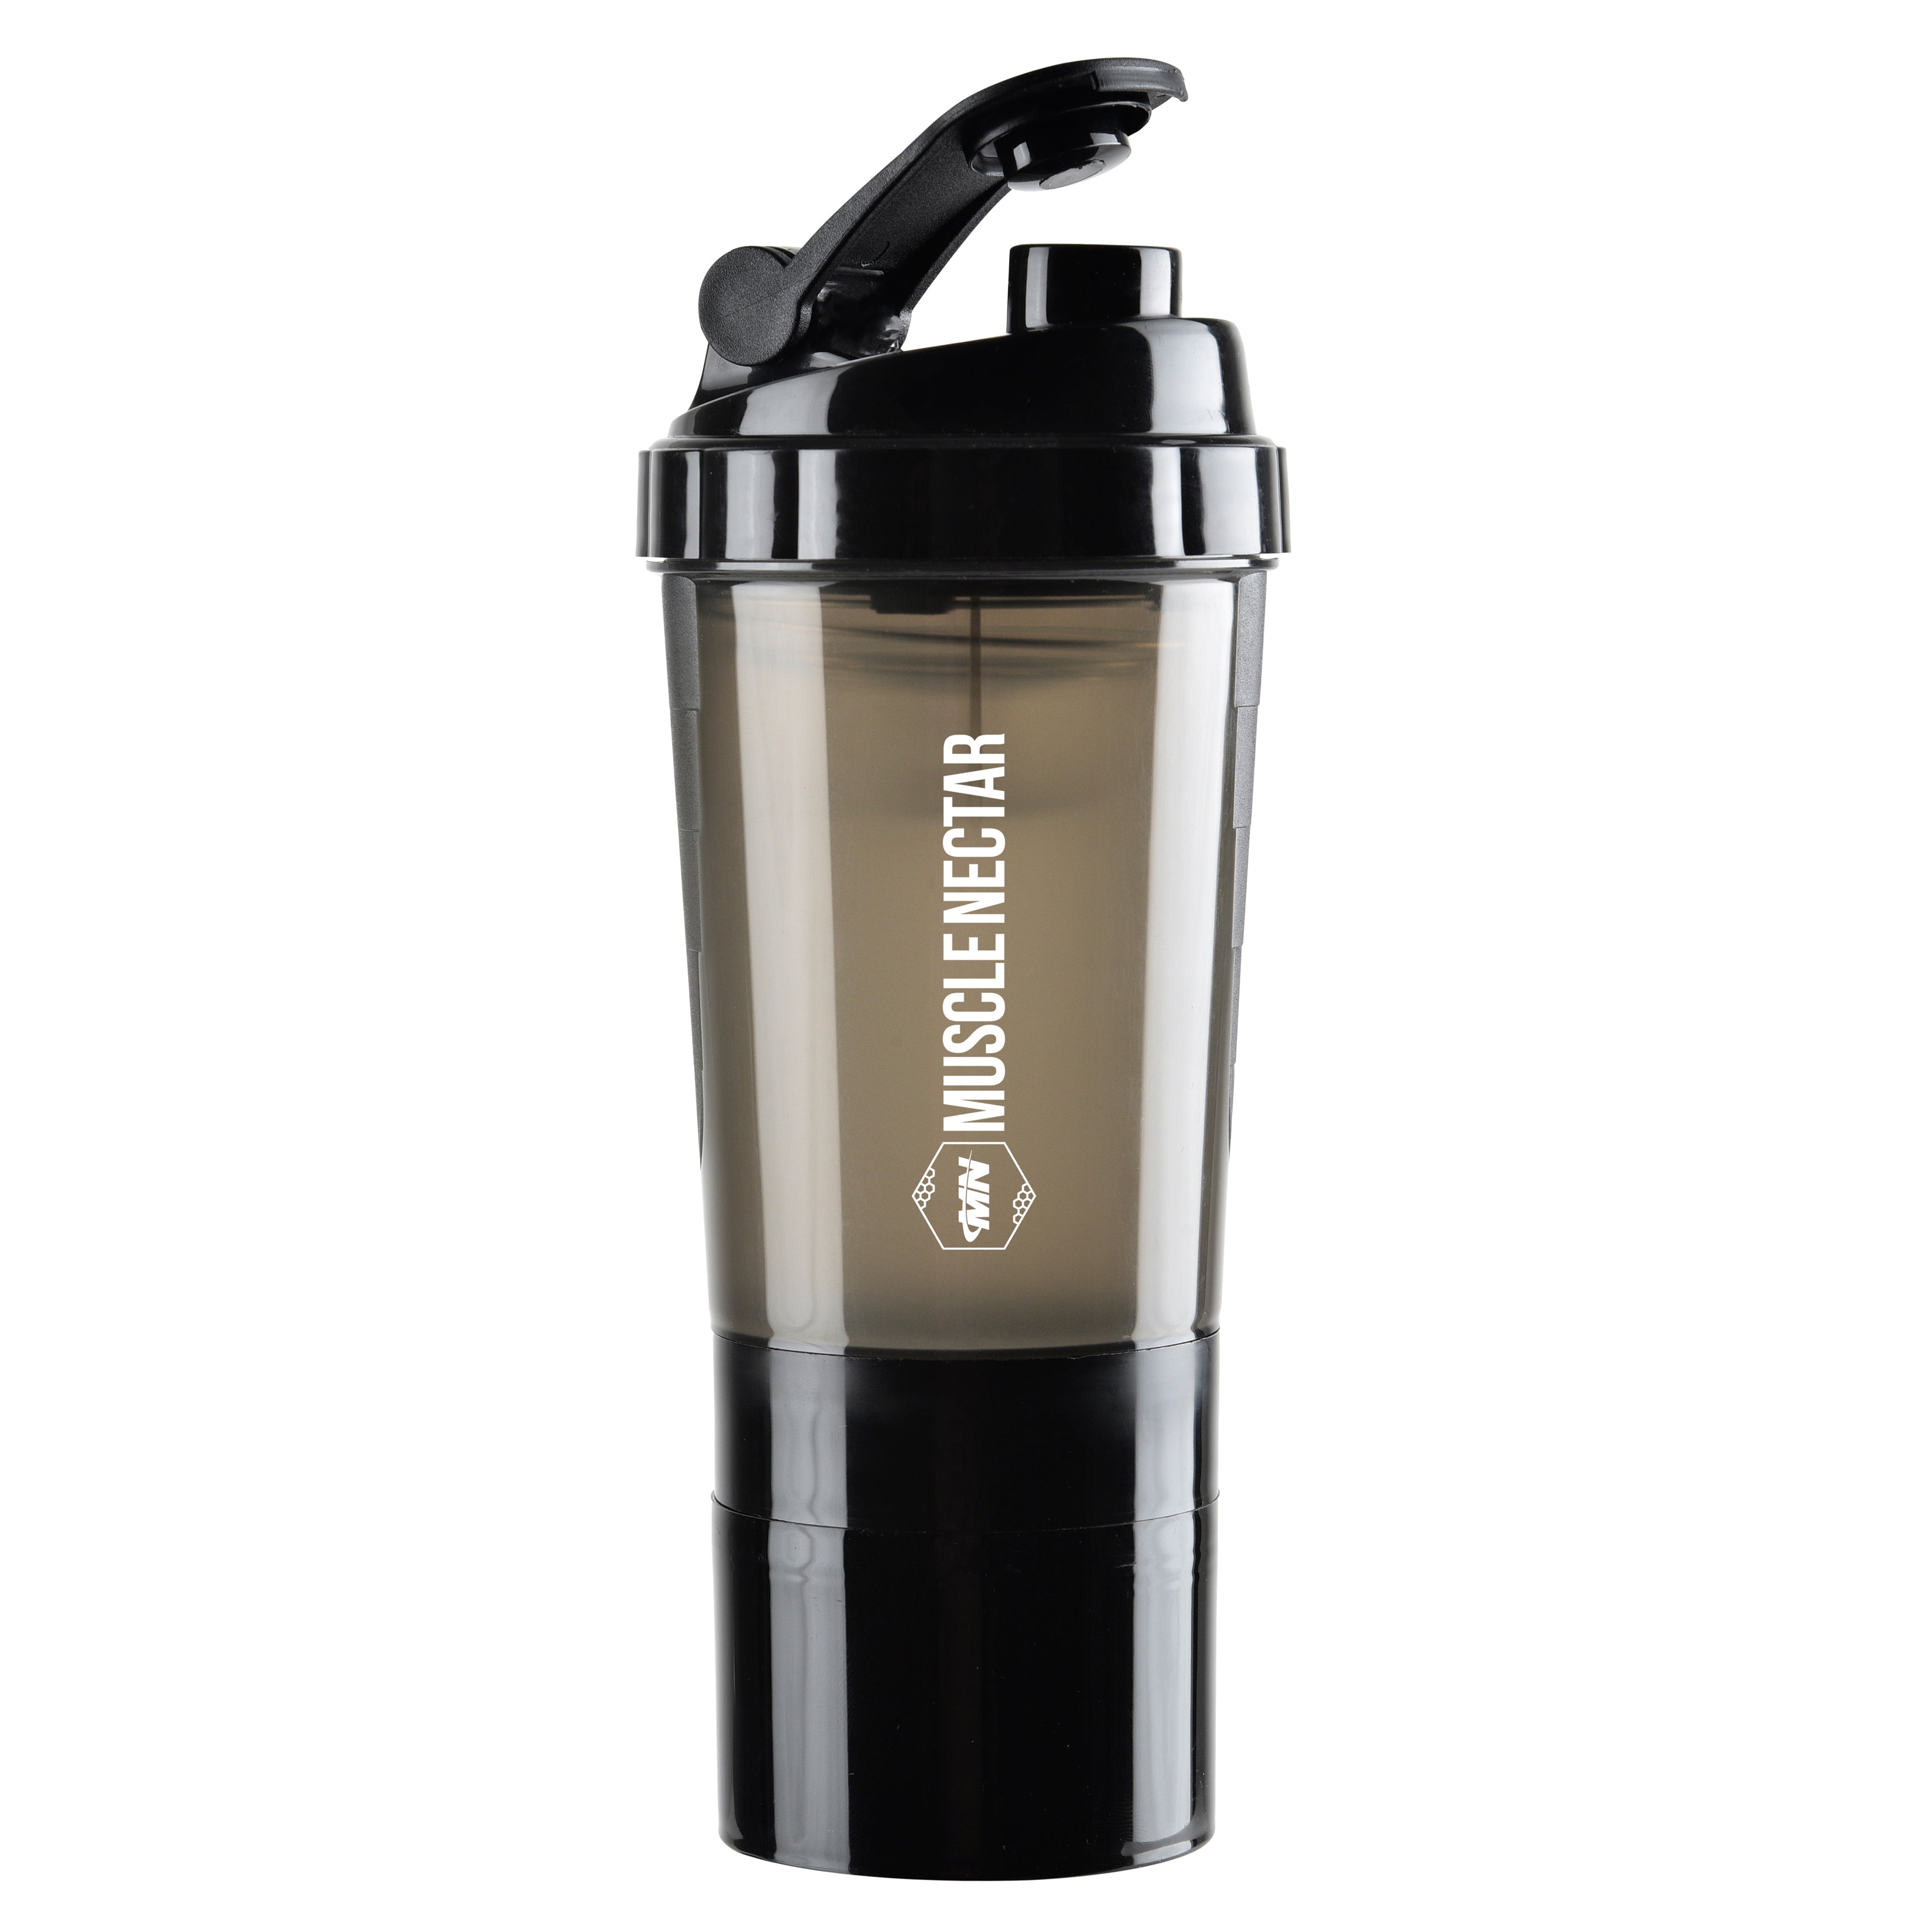 CHUBS Fitness Series SUMMER SPECIAL Edition 500 ML Gallon Bottle Shaker For, Hydration, MIXER, SHAKER, BOTTLE